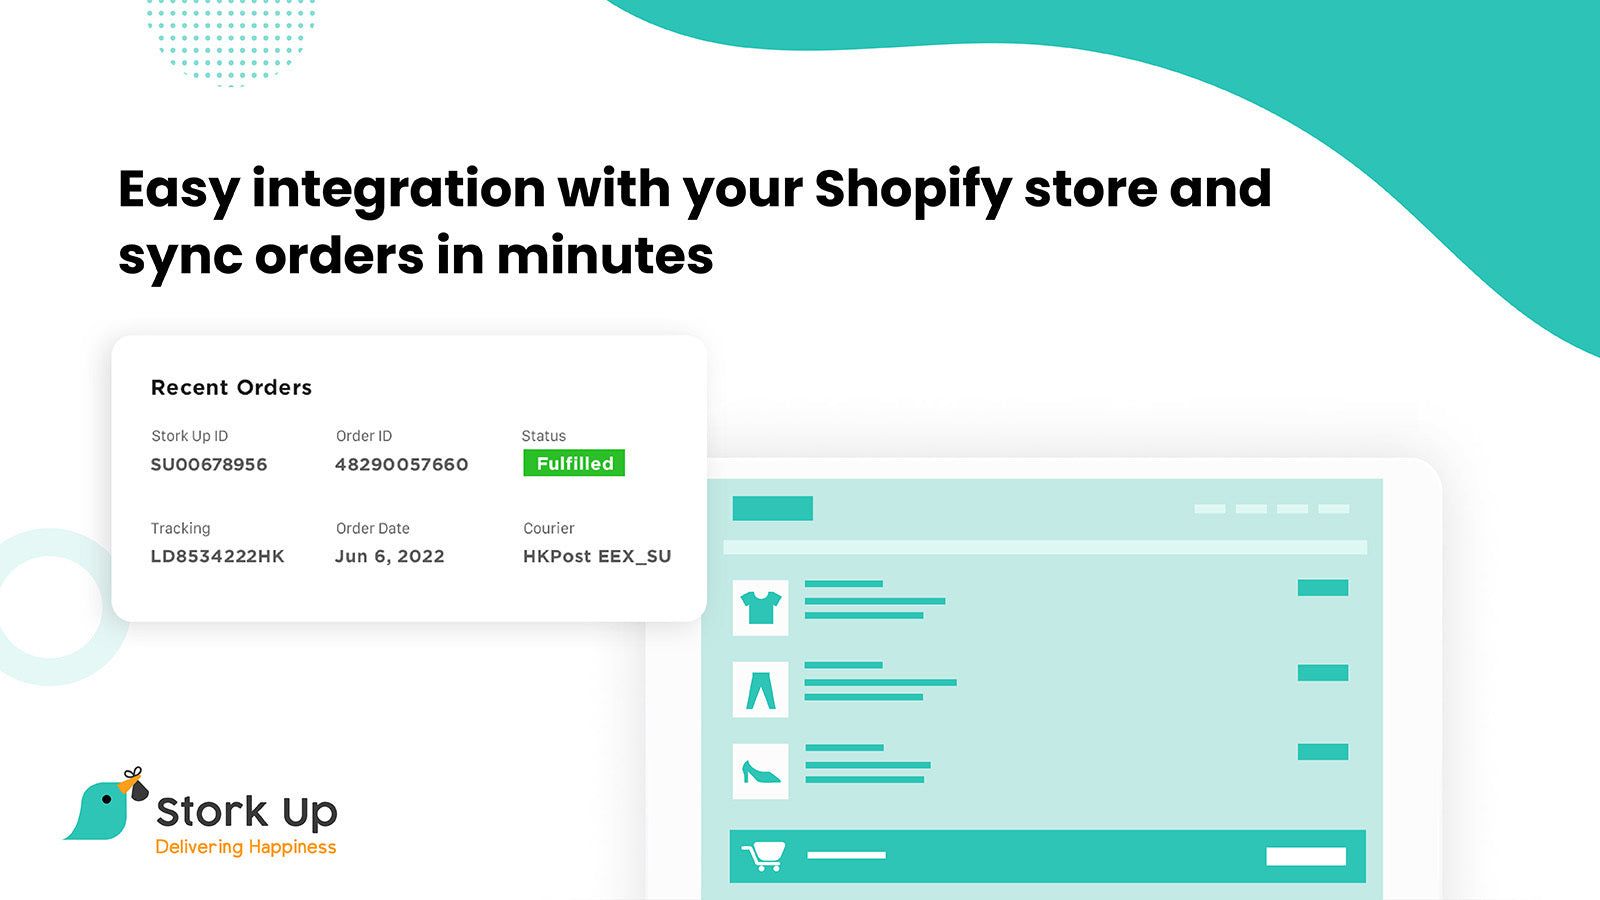  Easy integration with your Shopify store and sync in minutes.